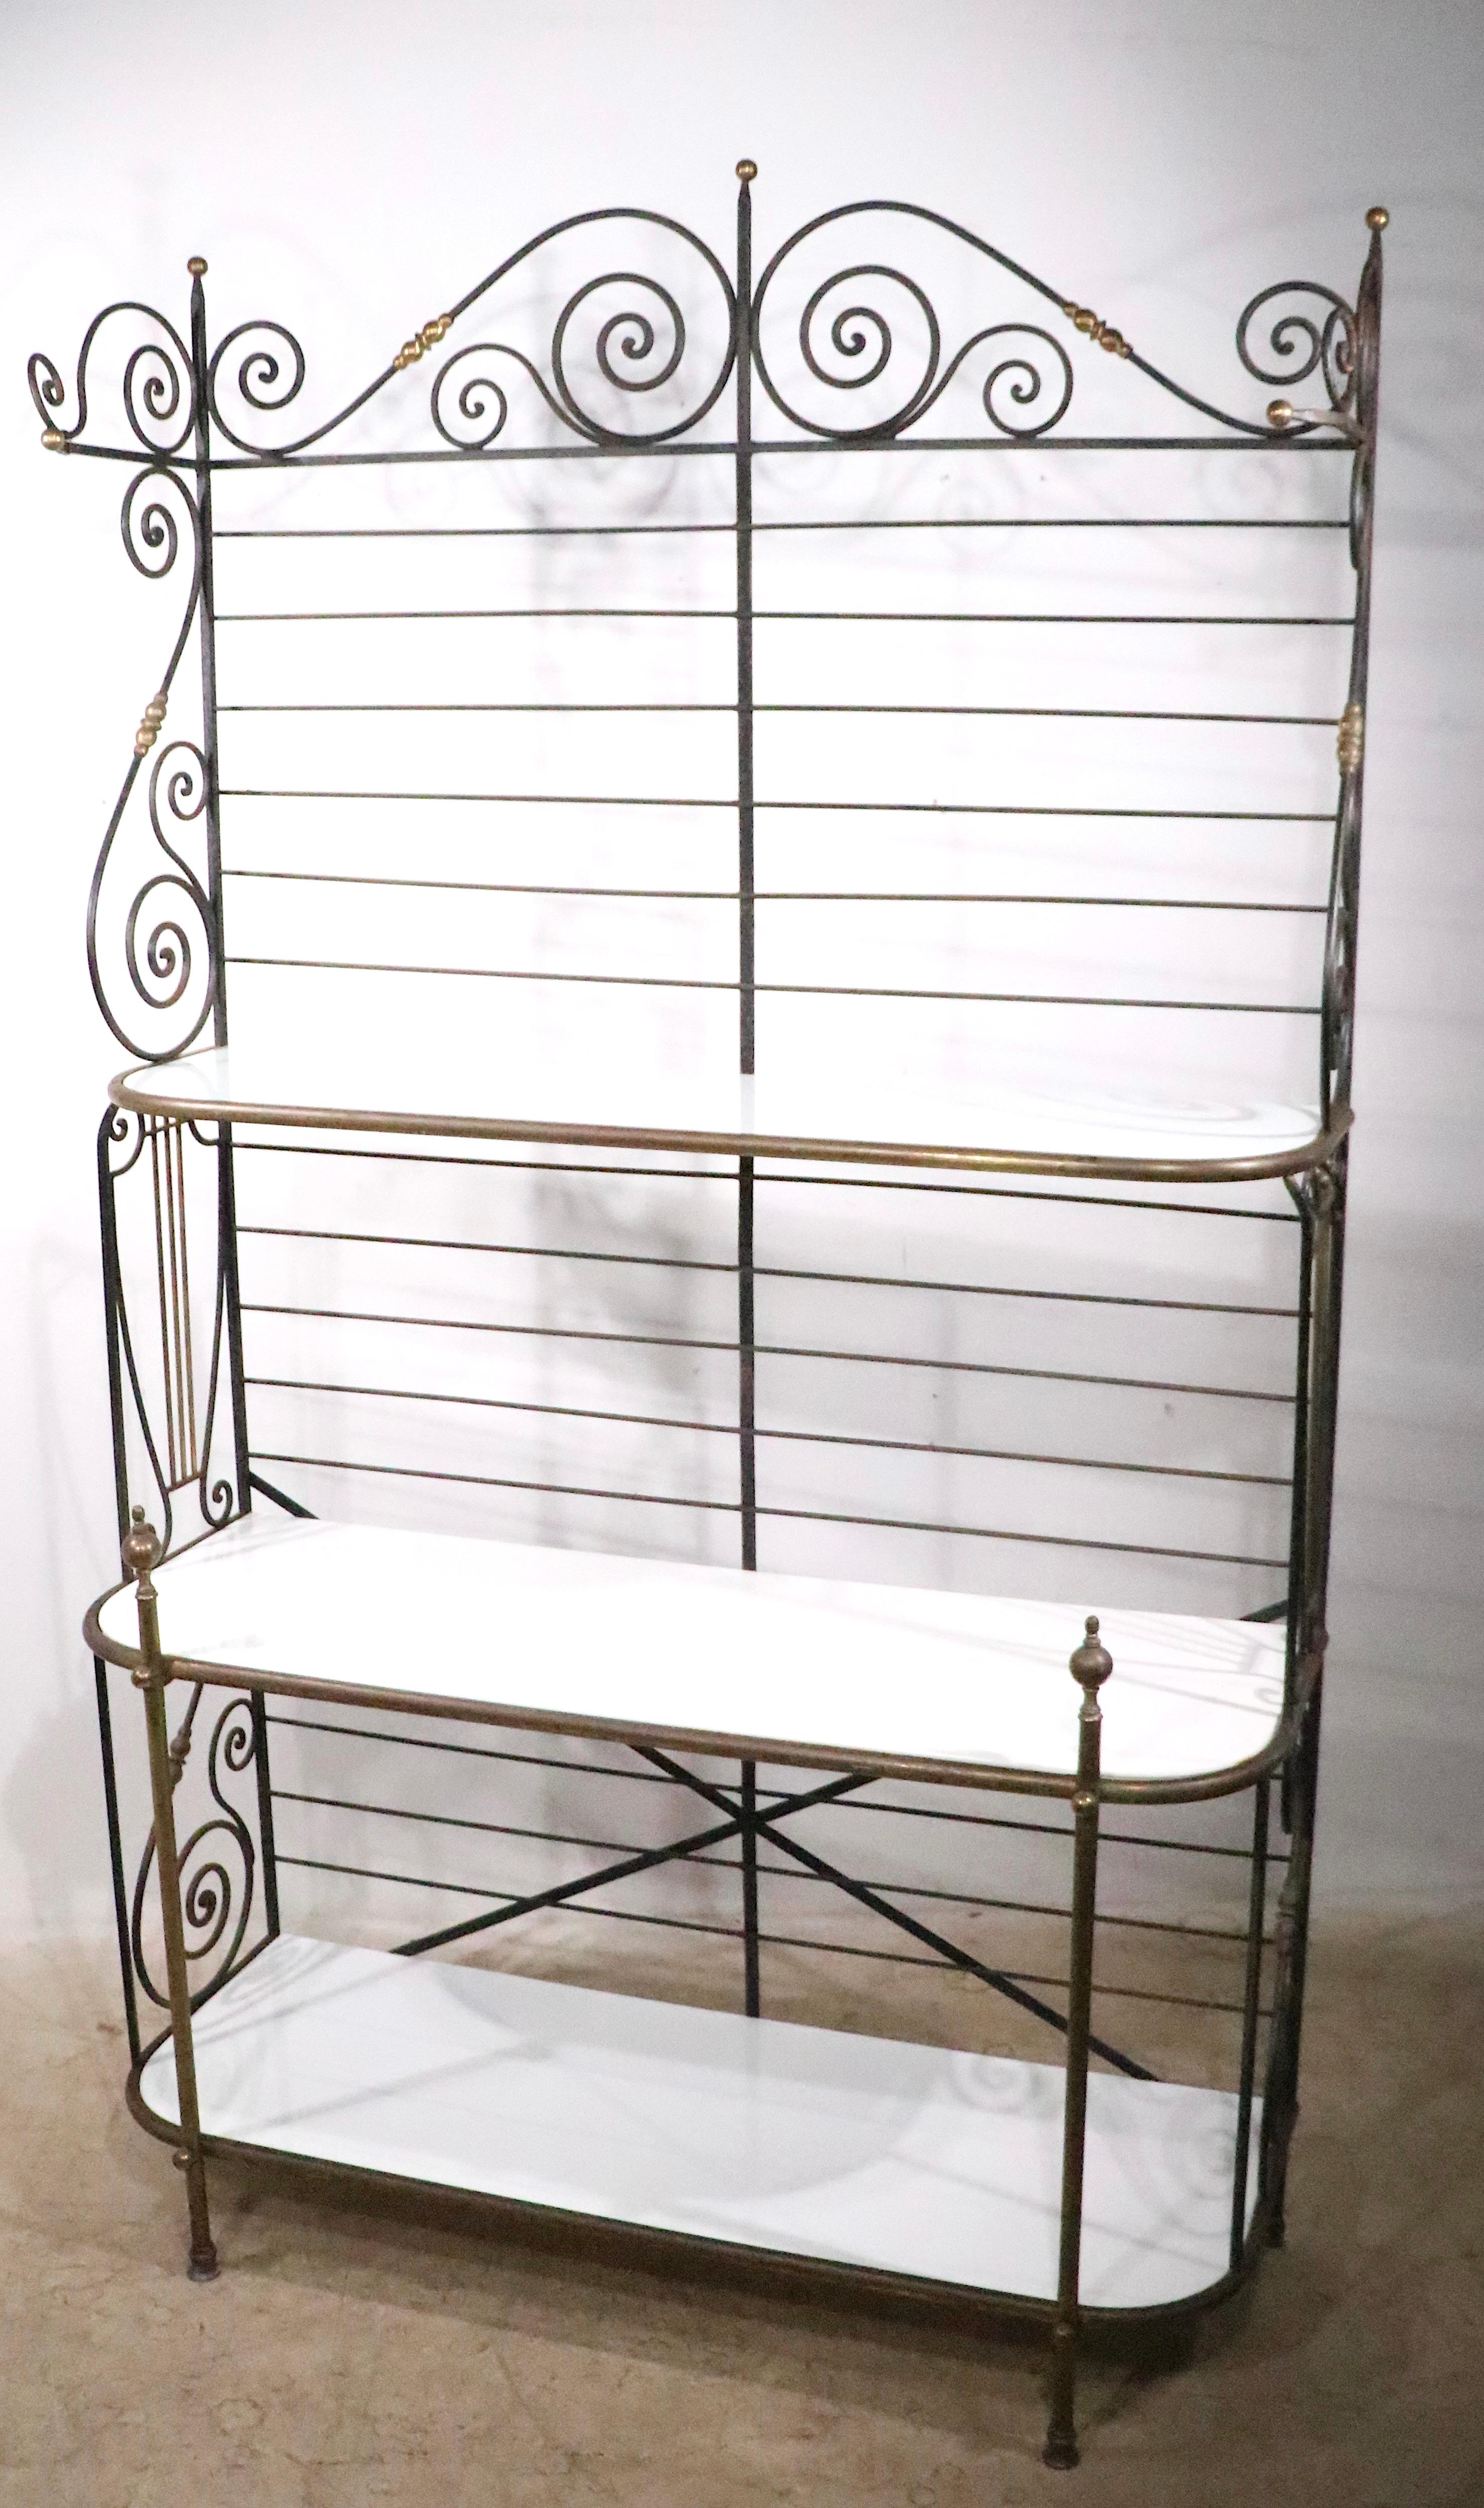 Wrought Iron Brass and Glass French Style Bakers Rack c. Mid 20th C. 4